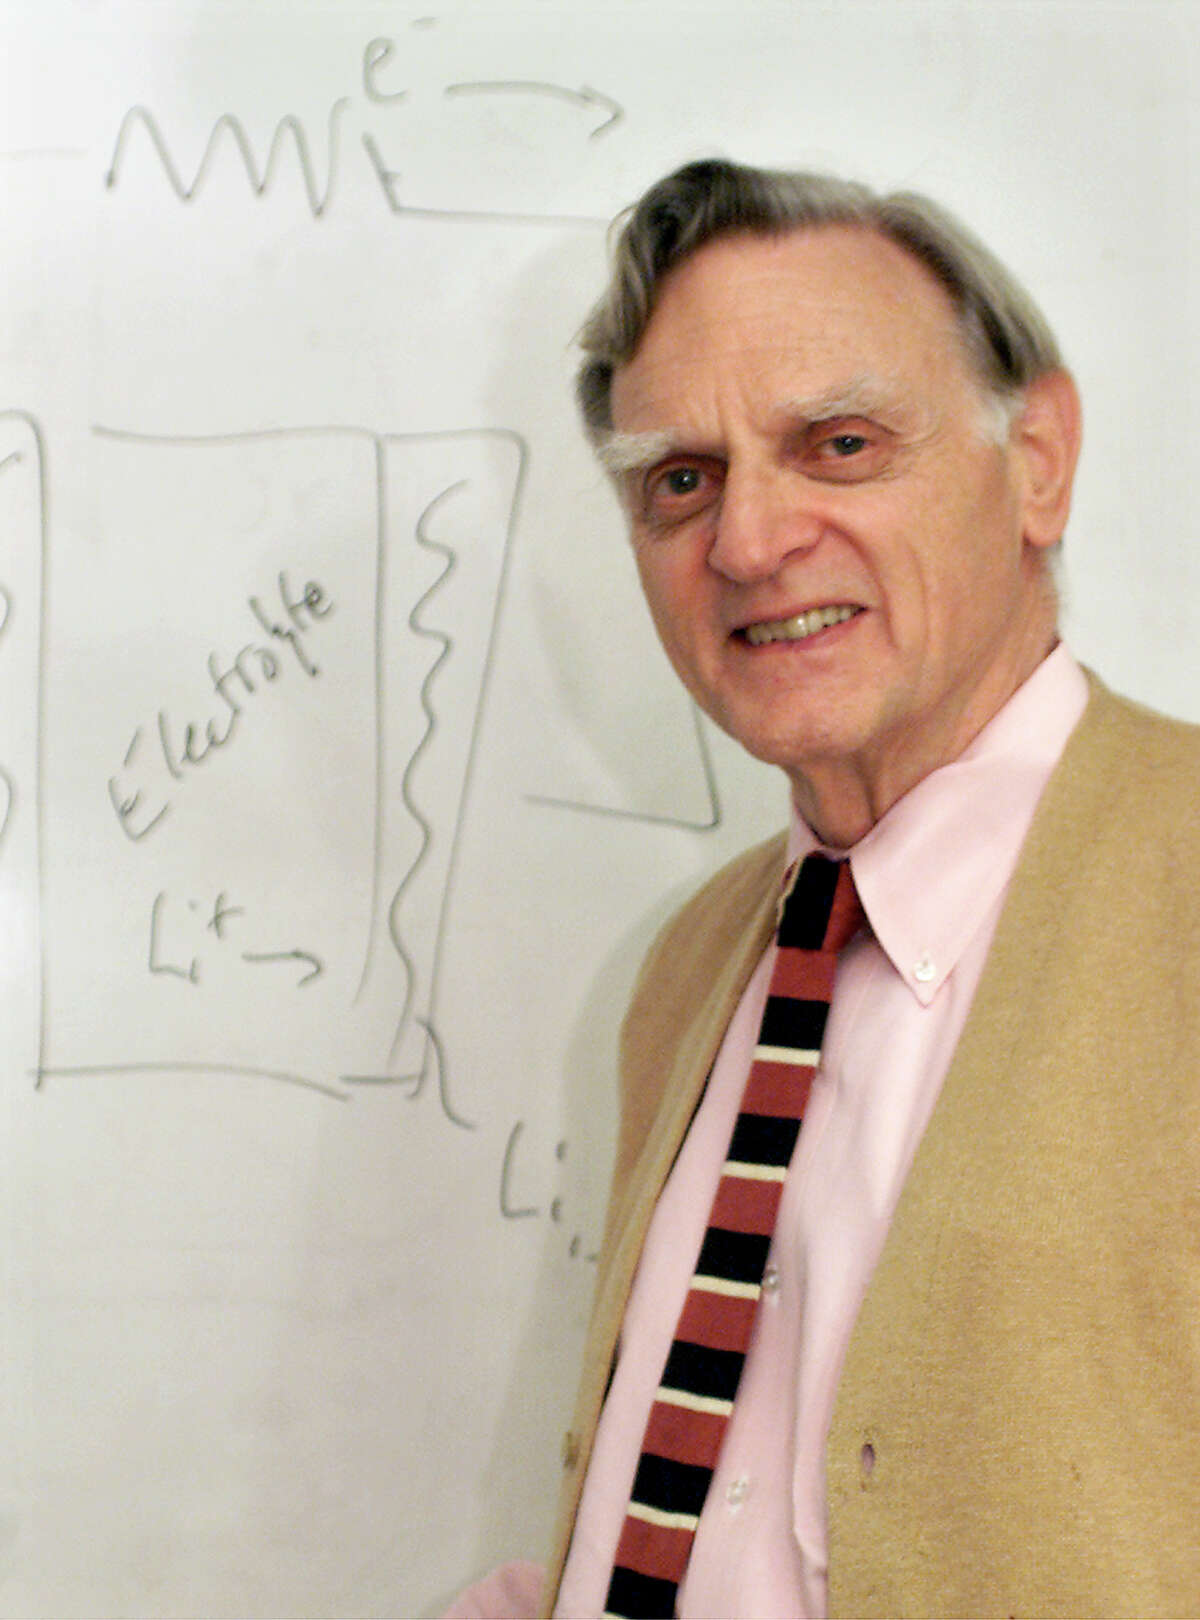 John B. Goodenough in front of his diagram of a battery on the board in his office at the University of Texas in Austin Friday afternoon 12/15/00 photo by Rebecca McEntee/AA-S. HOUCHRON CAPTION (06/05/2004): UT Professor John B. Goodenough, 81, developed technology for the lithium battery.